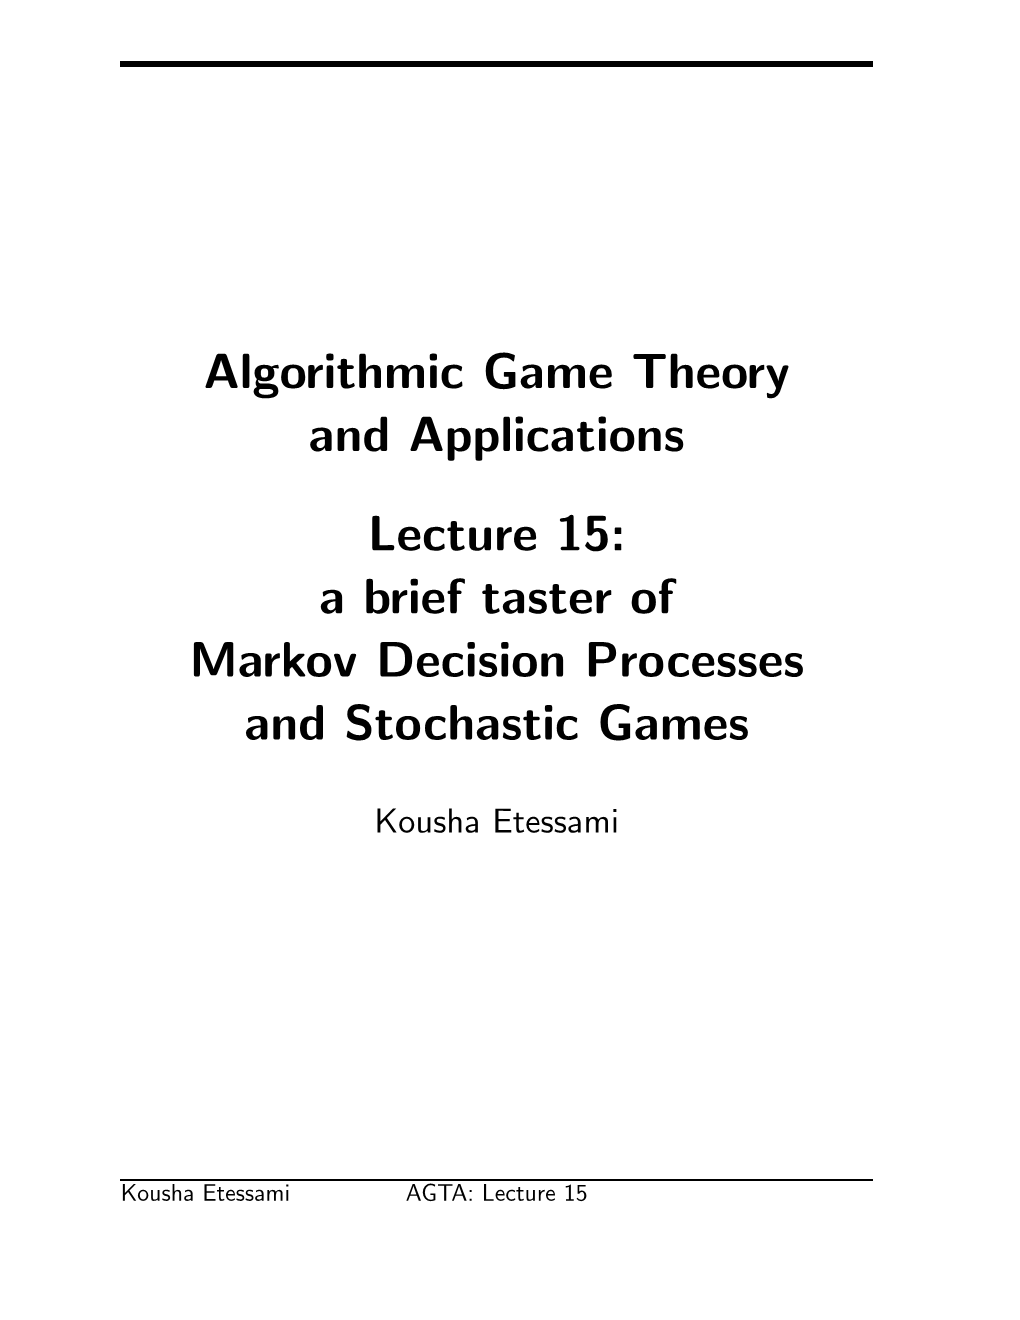 A Brief Taster of Markov Decision Processes and Stochastic Games